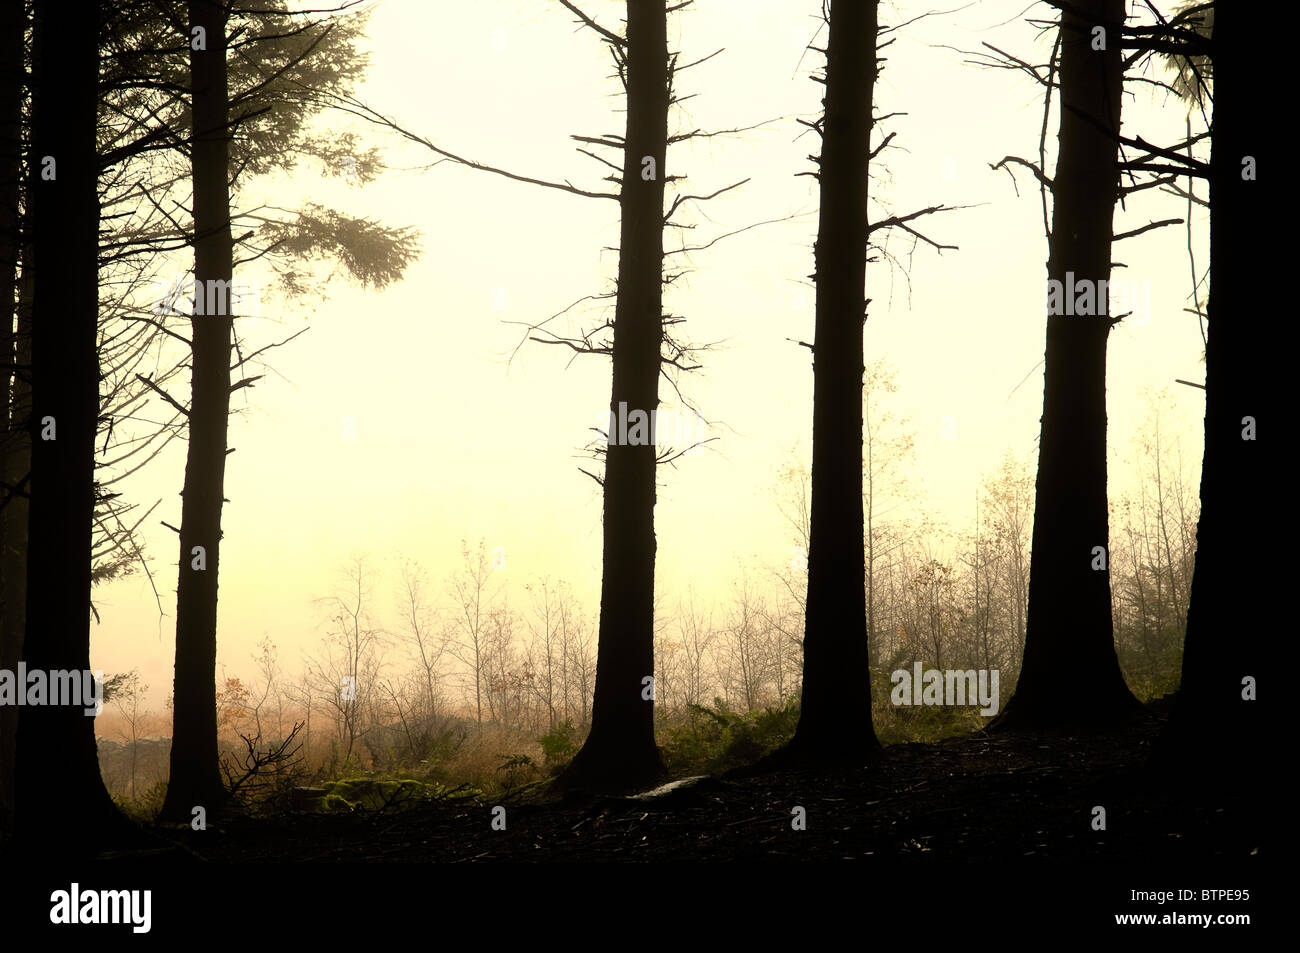 Trees on edge of forest silhouetted against sky Stock Photo